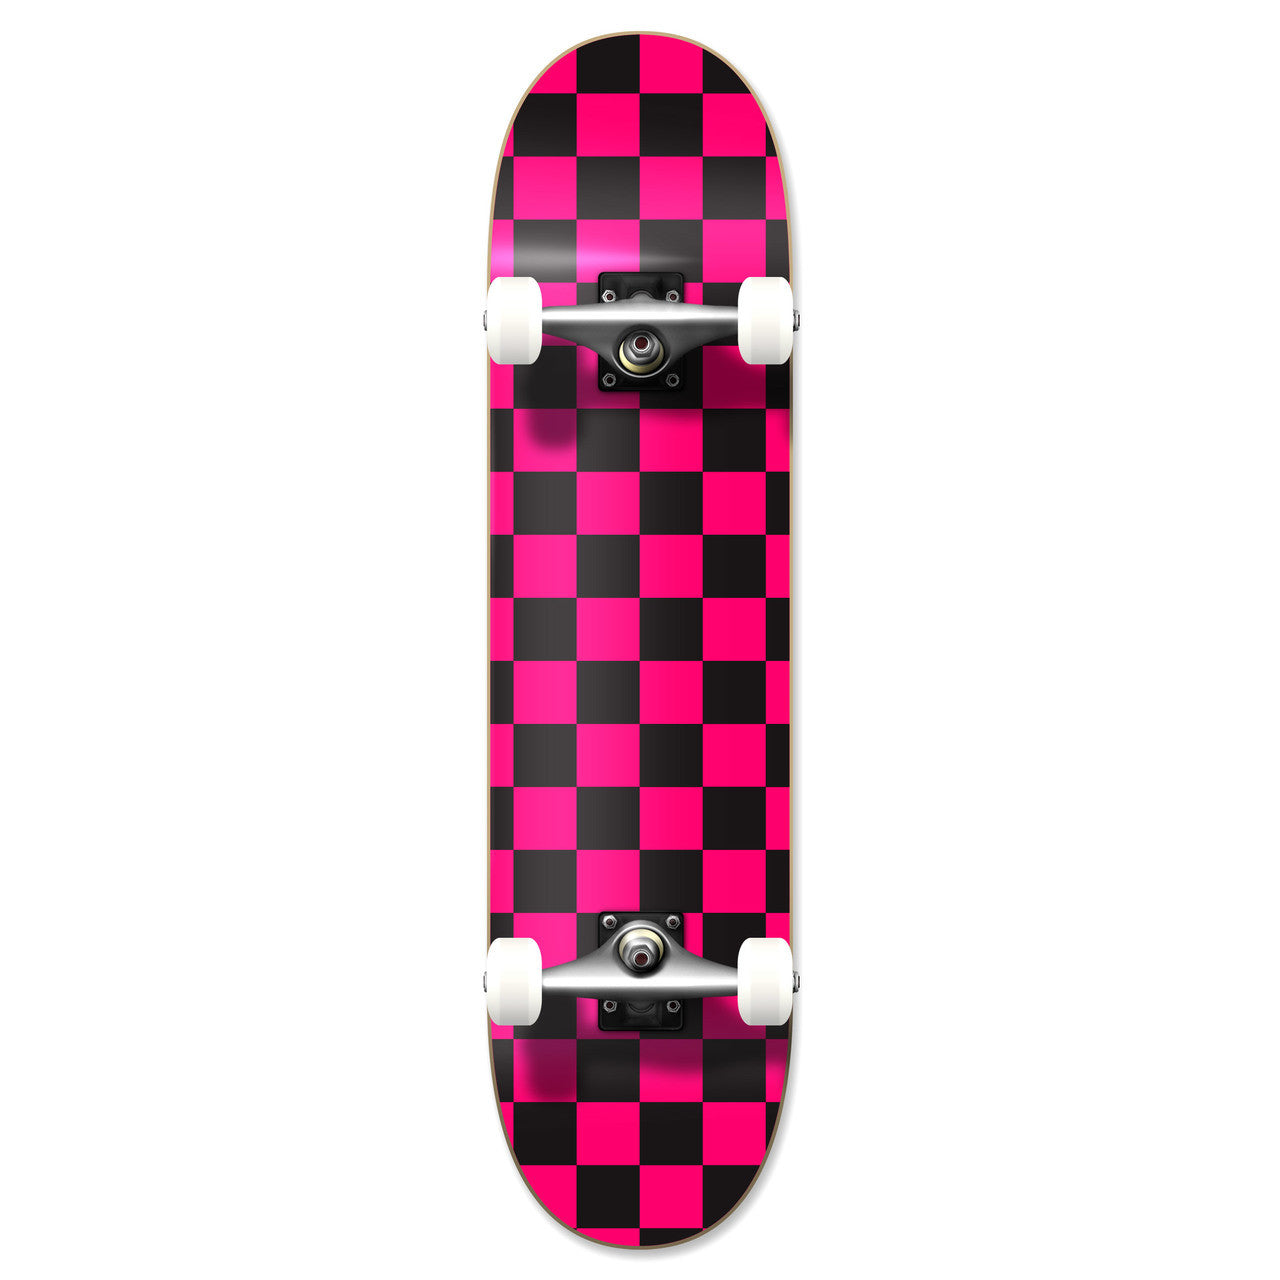 Yocaher Complete Skateboard 7.75" - Checker Pink